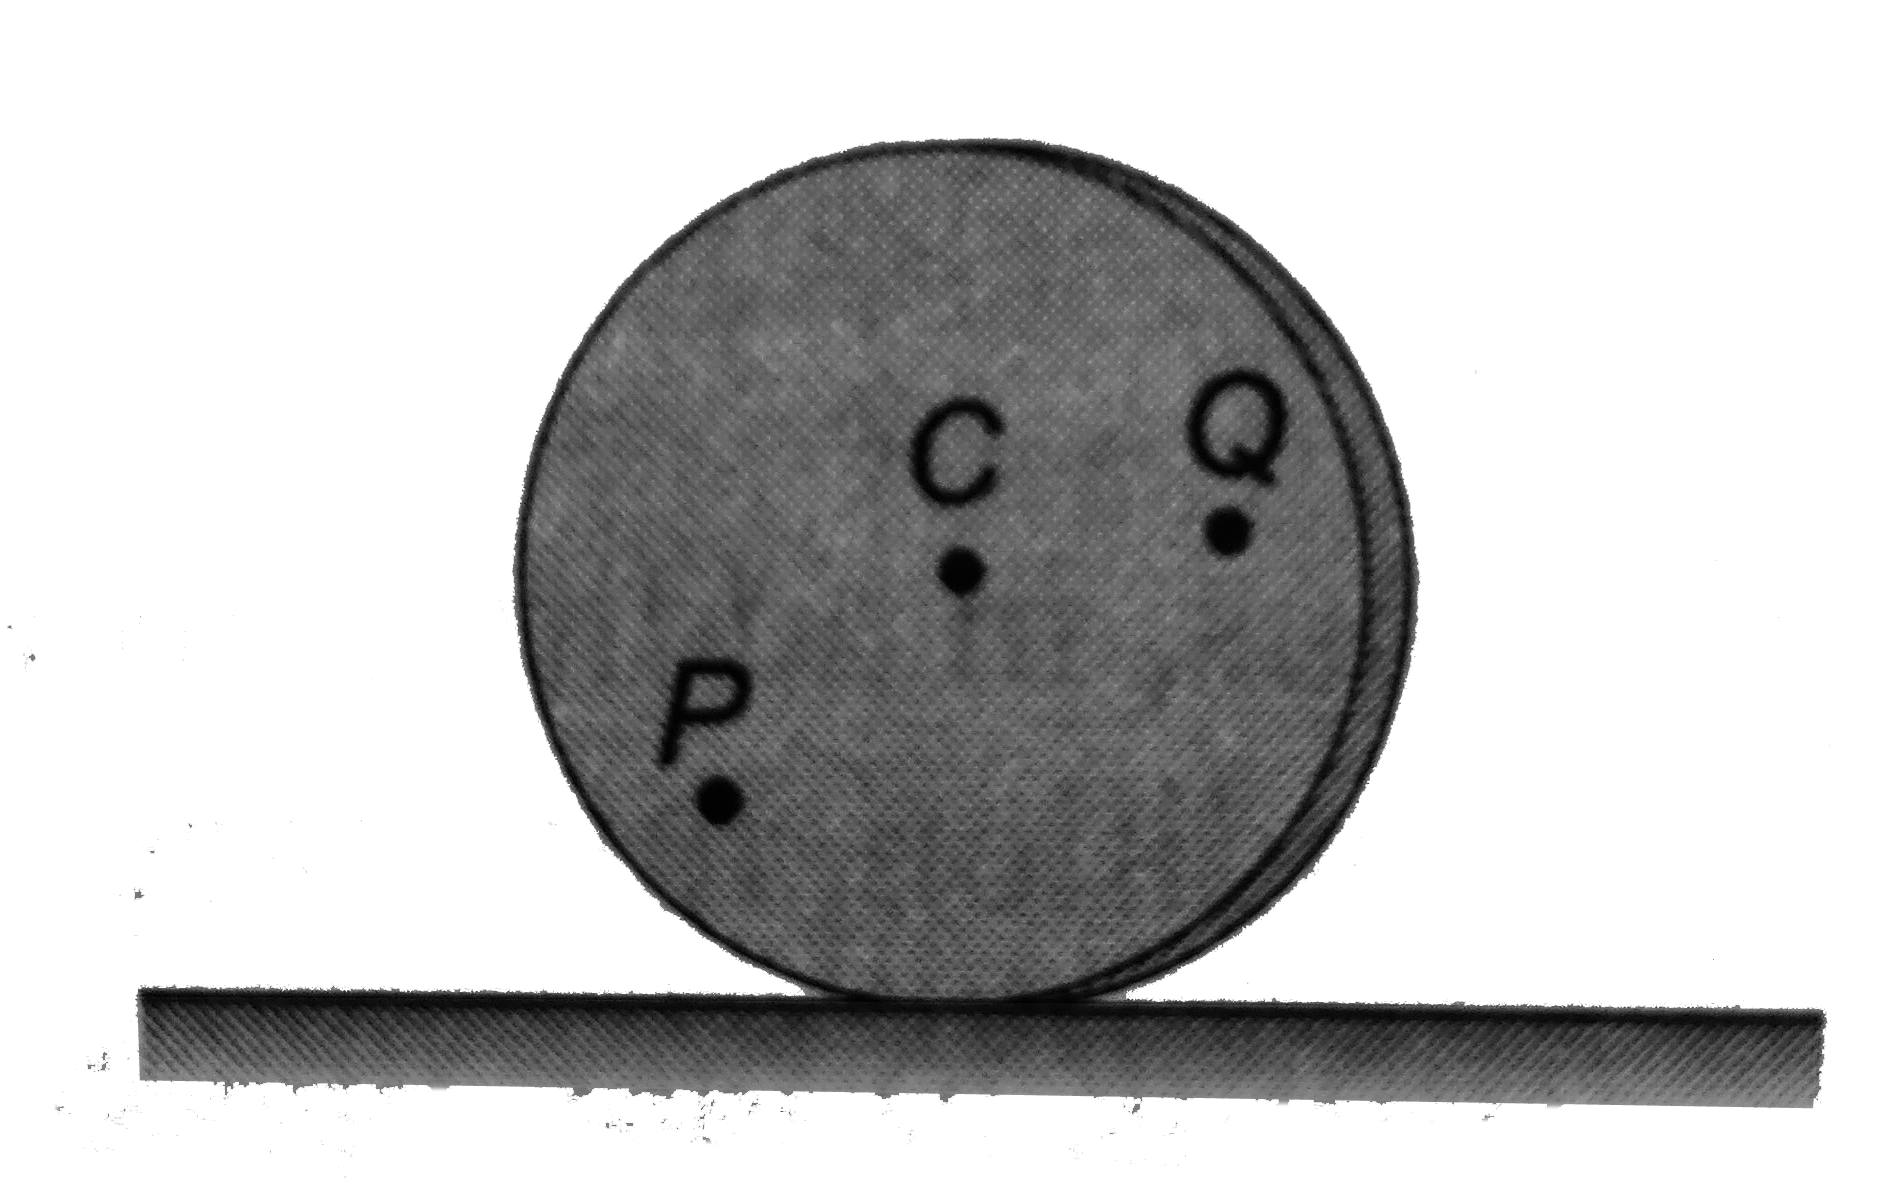 A disc is rolling (without slipping) on a horizontal surface. C is its centre and Q and P are two point equidistanec from C. let upsilon(p),upsilon(Q) and upsilon(C) be the magnitude of velocities of points P, Q, and C repsectively,   (a). upsilon(Q)gtupsilon(C)gtupsilon(P)   (b). upsilon(Q)ltupsilon(C)ltupsilon(P)   (c). upsilon(Q)=upsilon(P),upsilon(C)=(1)/(2)upsilon(P)   (d). upsilon(Q)ltupsilon(C)gtupsilon(P)